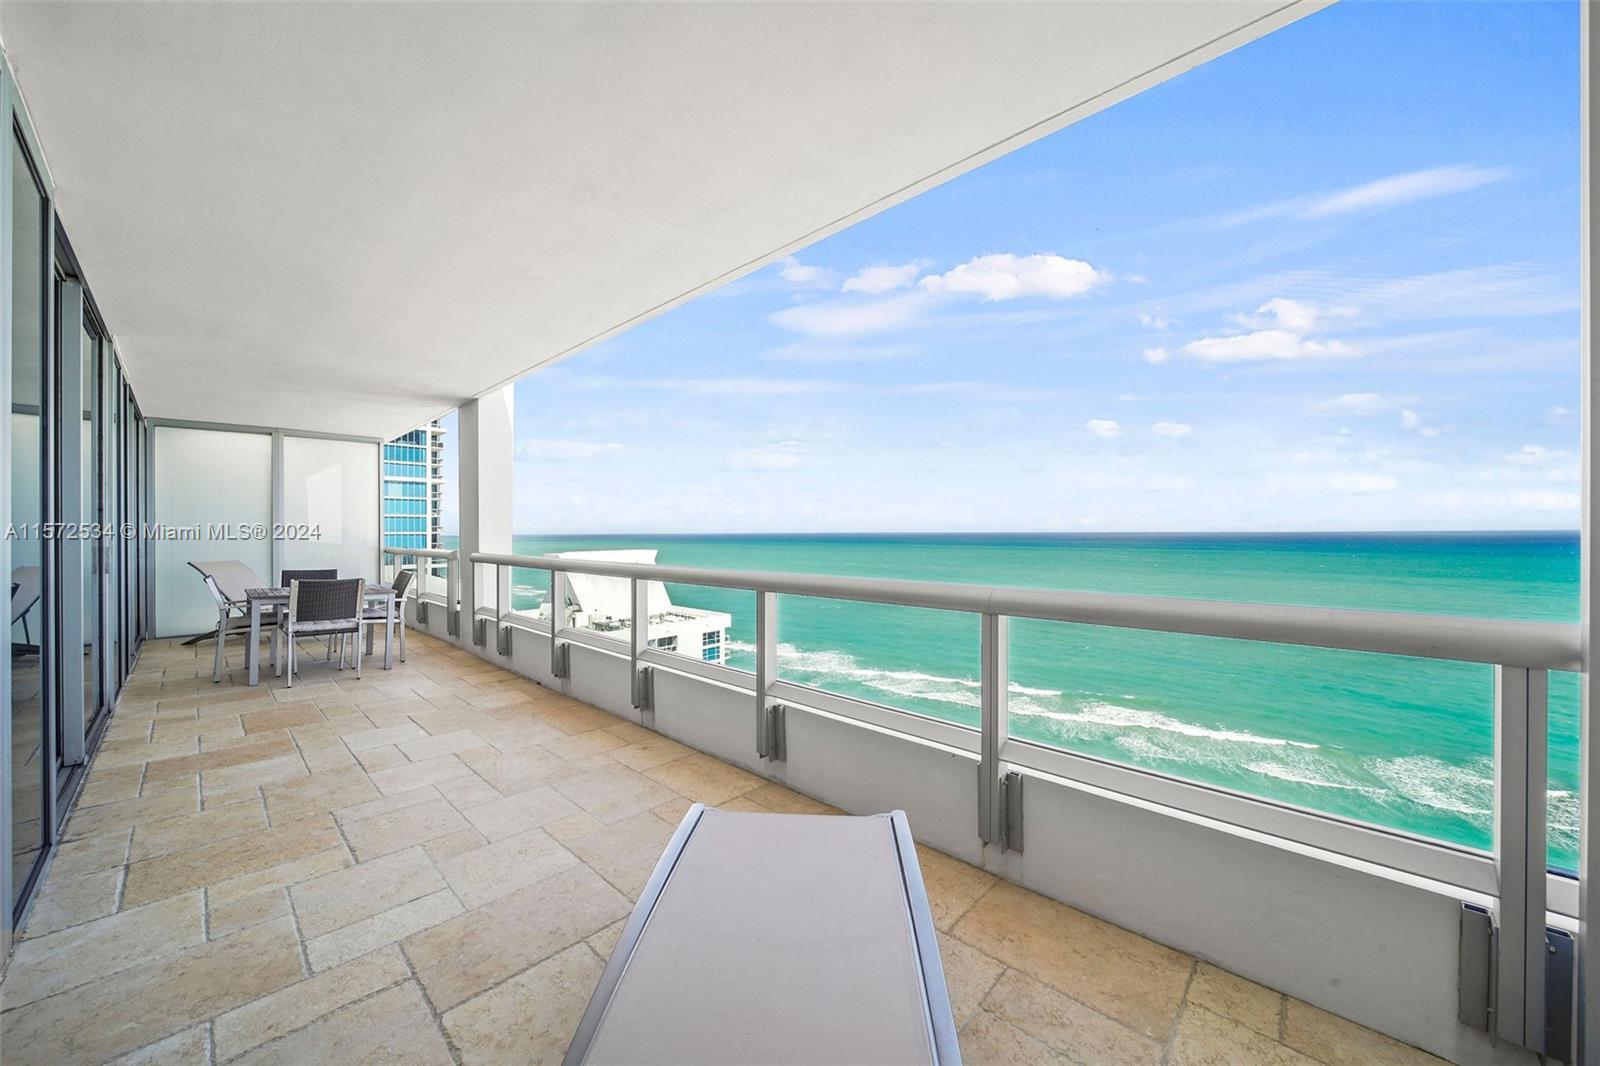 Rare opportunity to own DIRECT OCEAN VIEW Penthouse unit at Carillon Miami Wellness Resort, a premie